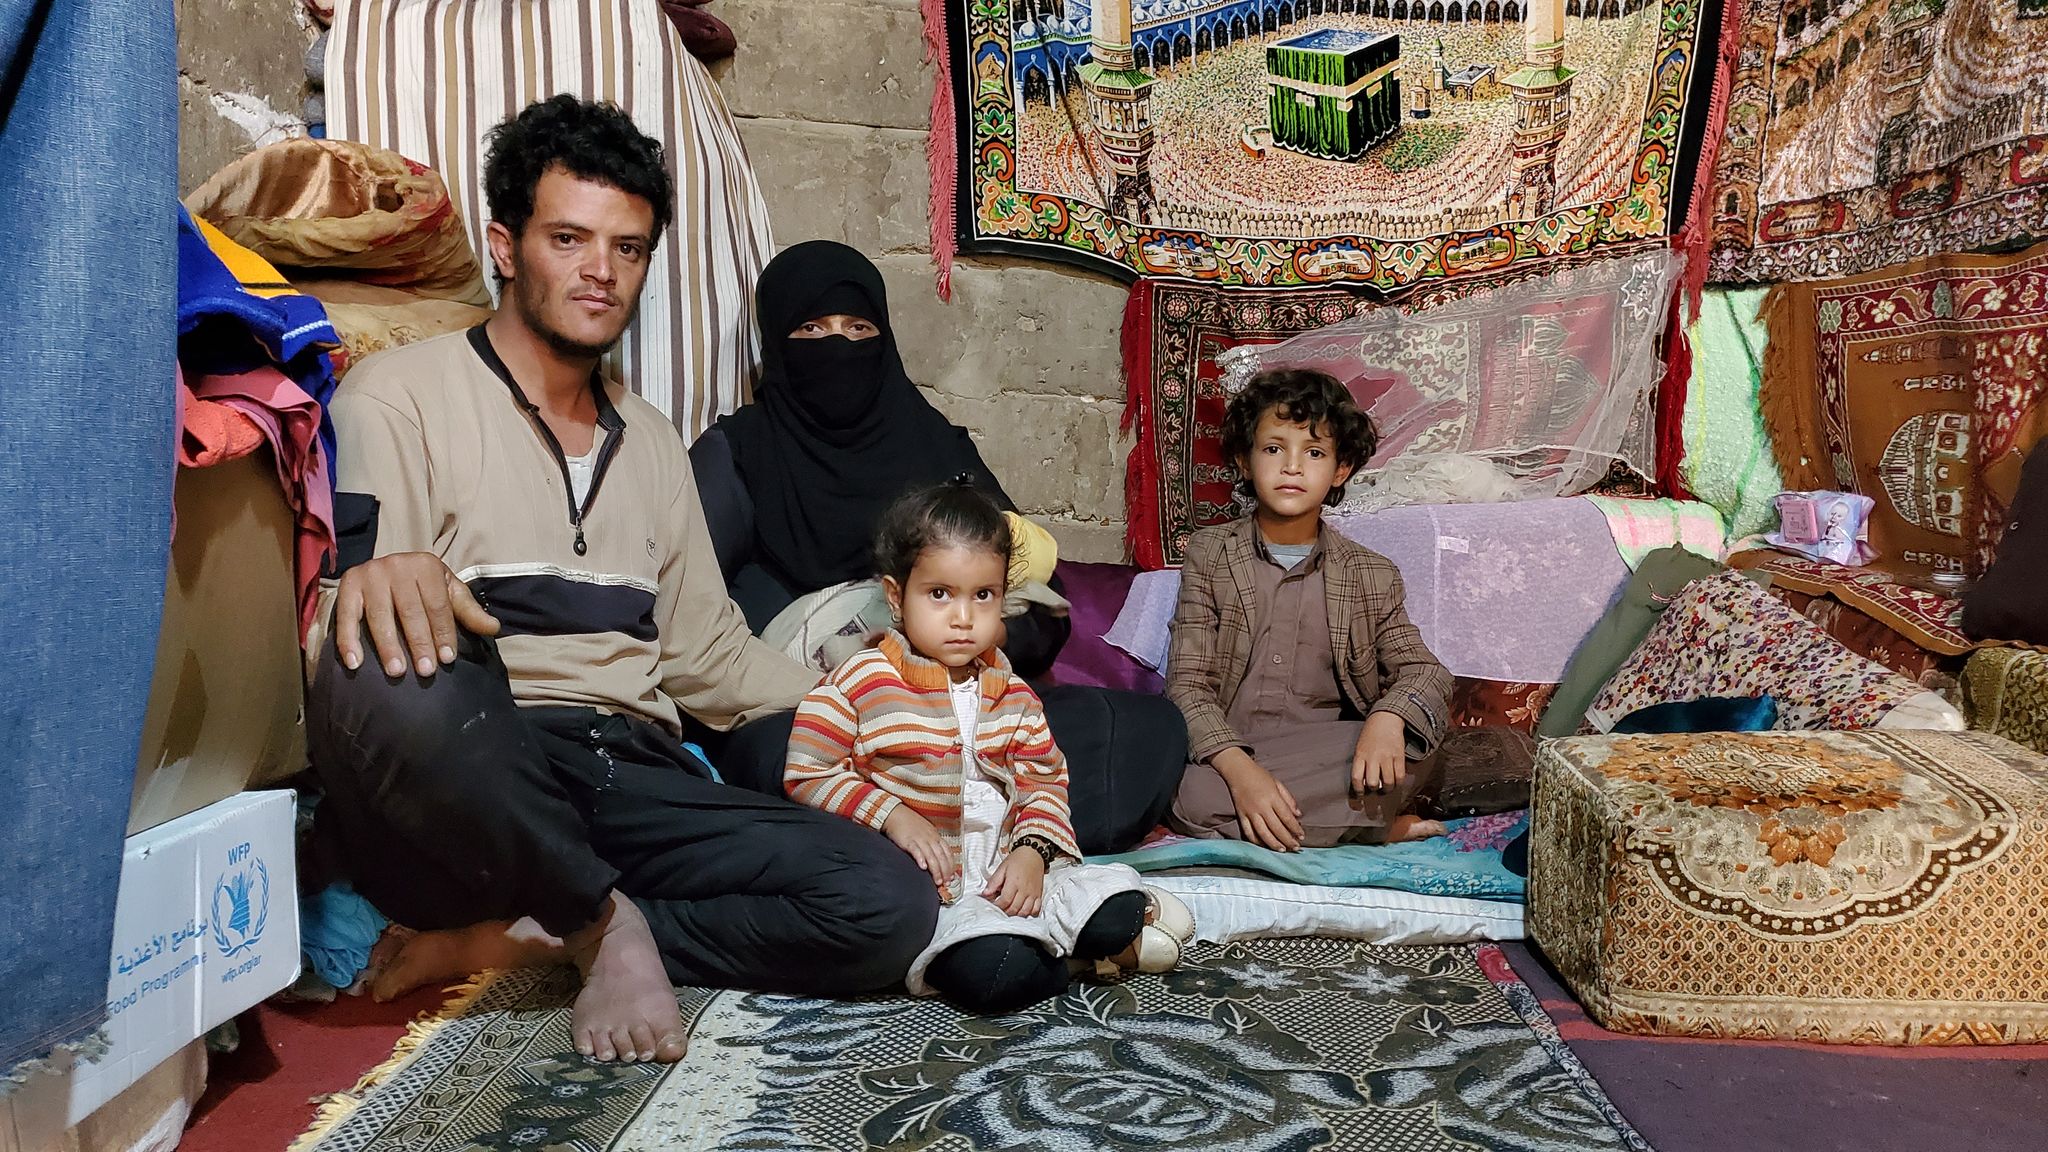 A man , woman and two kids sitting on the carpet of their House